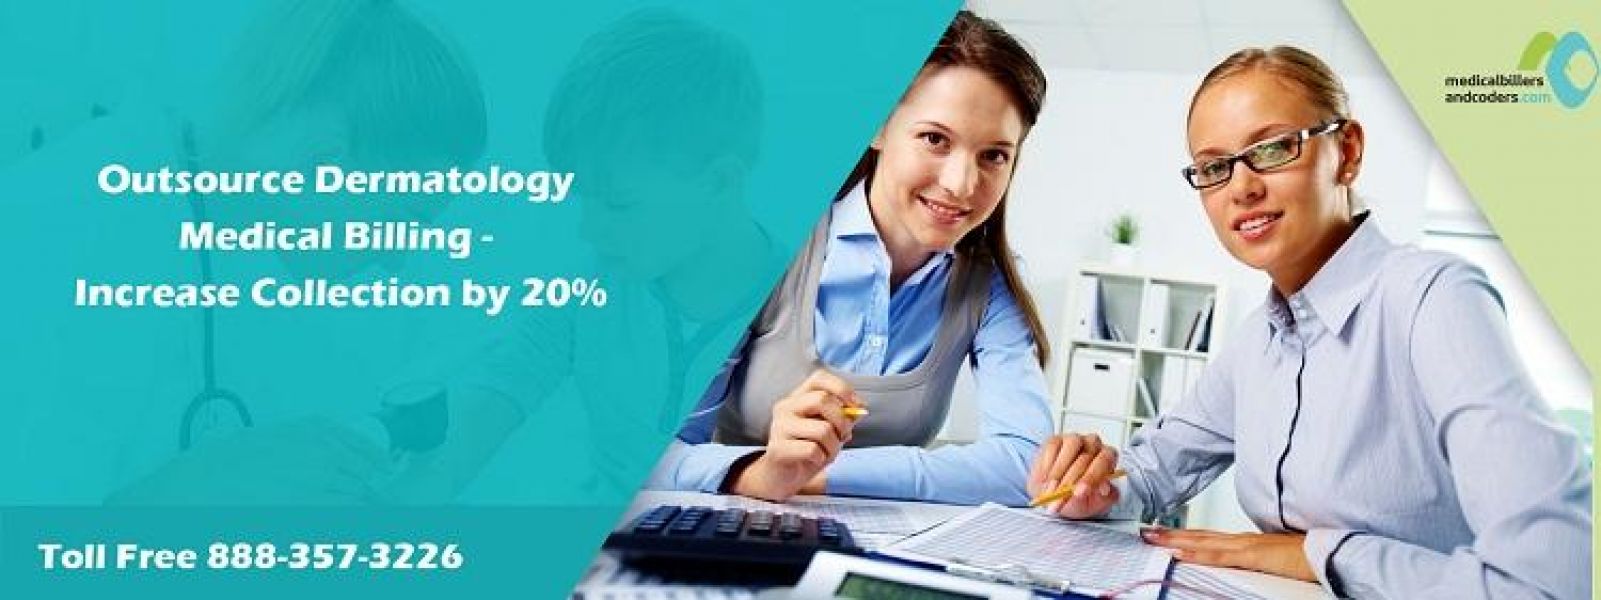 Outsource Dermatology Medical Billing – Increase Collection by 20%